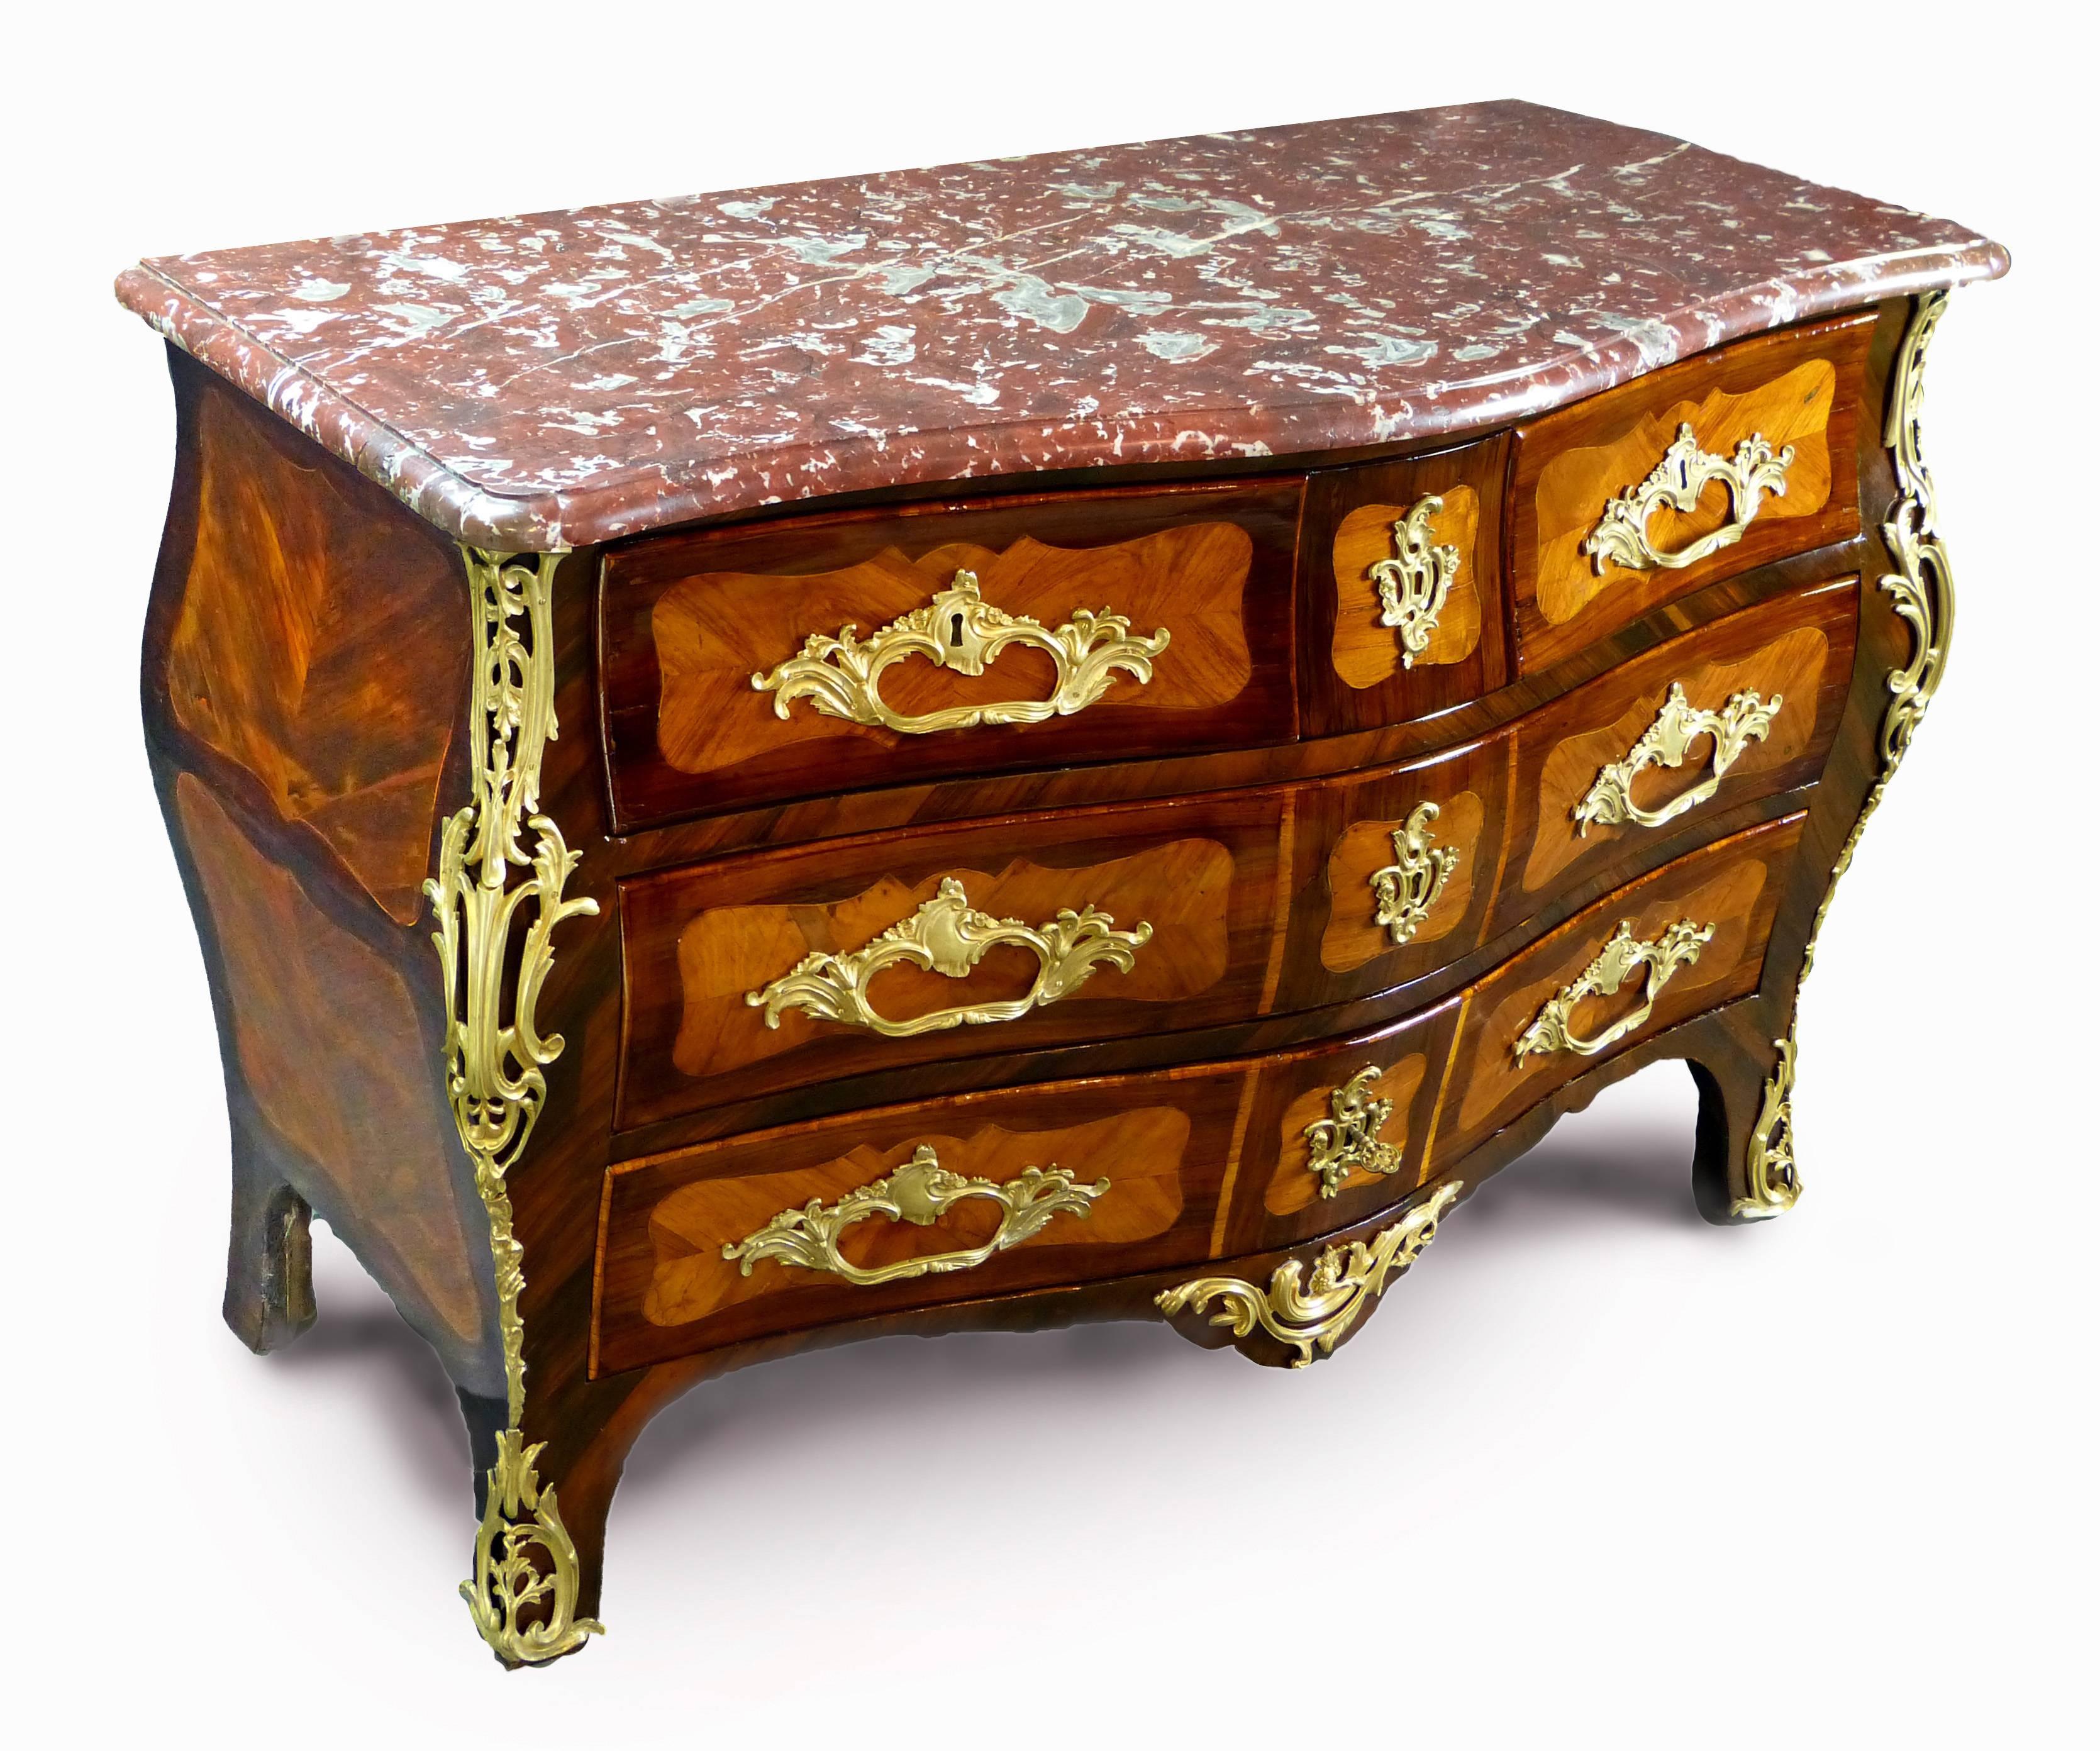 Outstanding Louis XV period mounted 'galbee' commode of cartouche shaped veneers of rosewood and kingwood with line inlays, bearing the stamp 